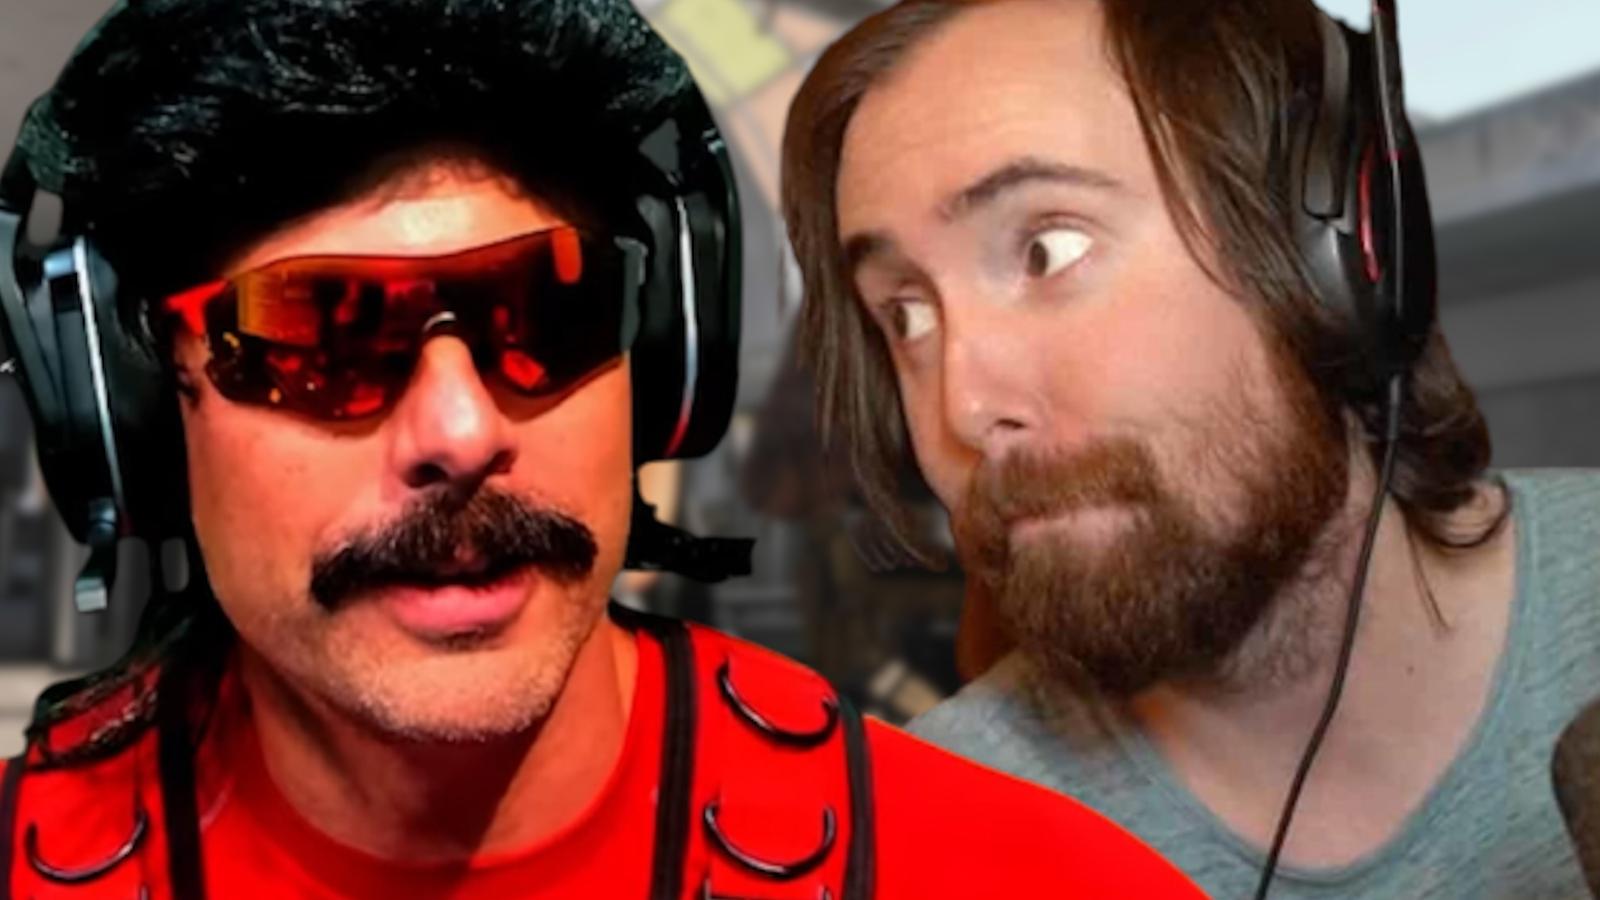 amy ainsley add girl dr disrespect cheated with photo